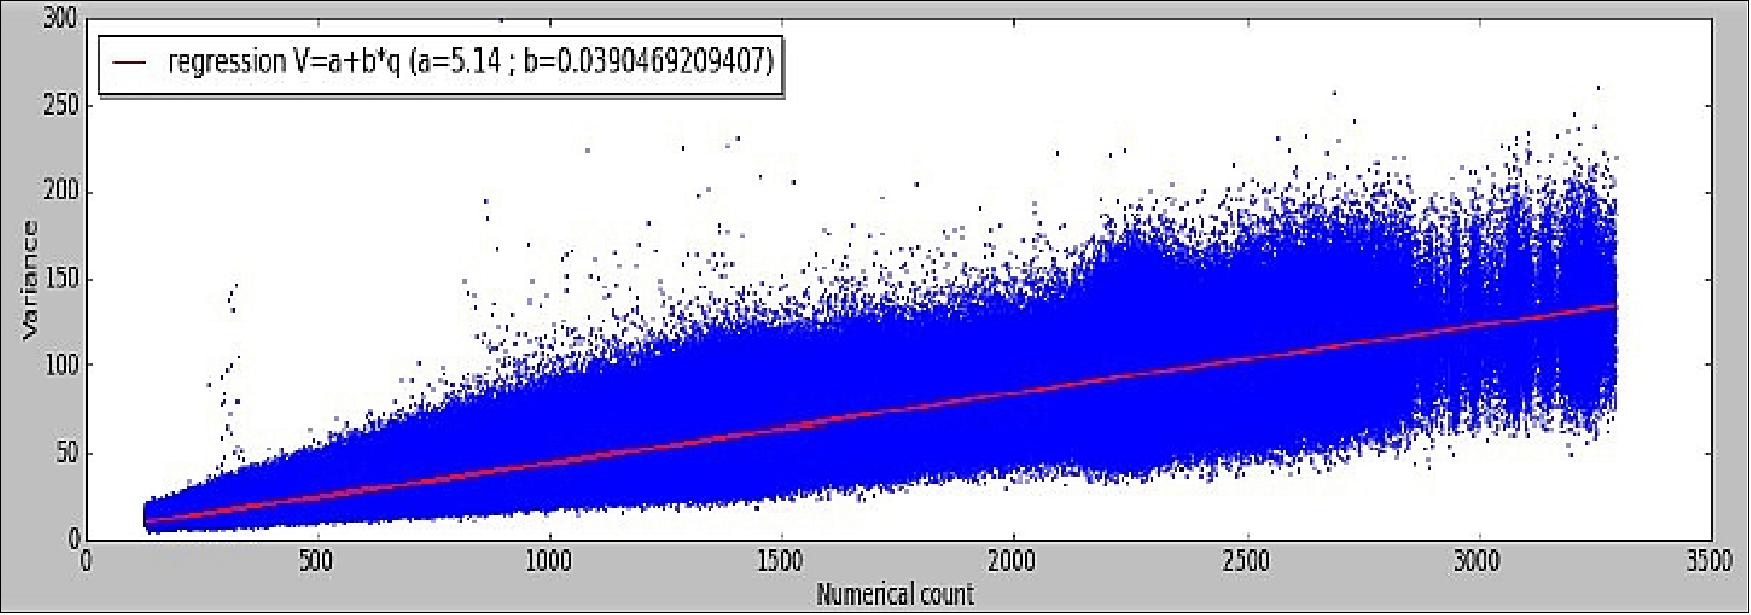 Figure 56: Variance of the radiometric noise computed on steady-mode image (image credit: CNES)